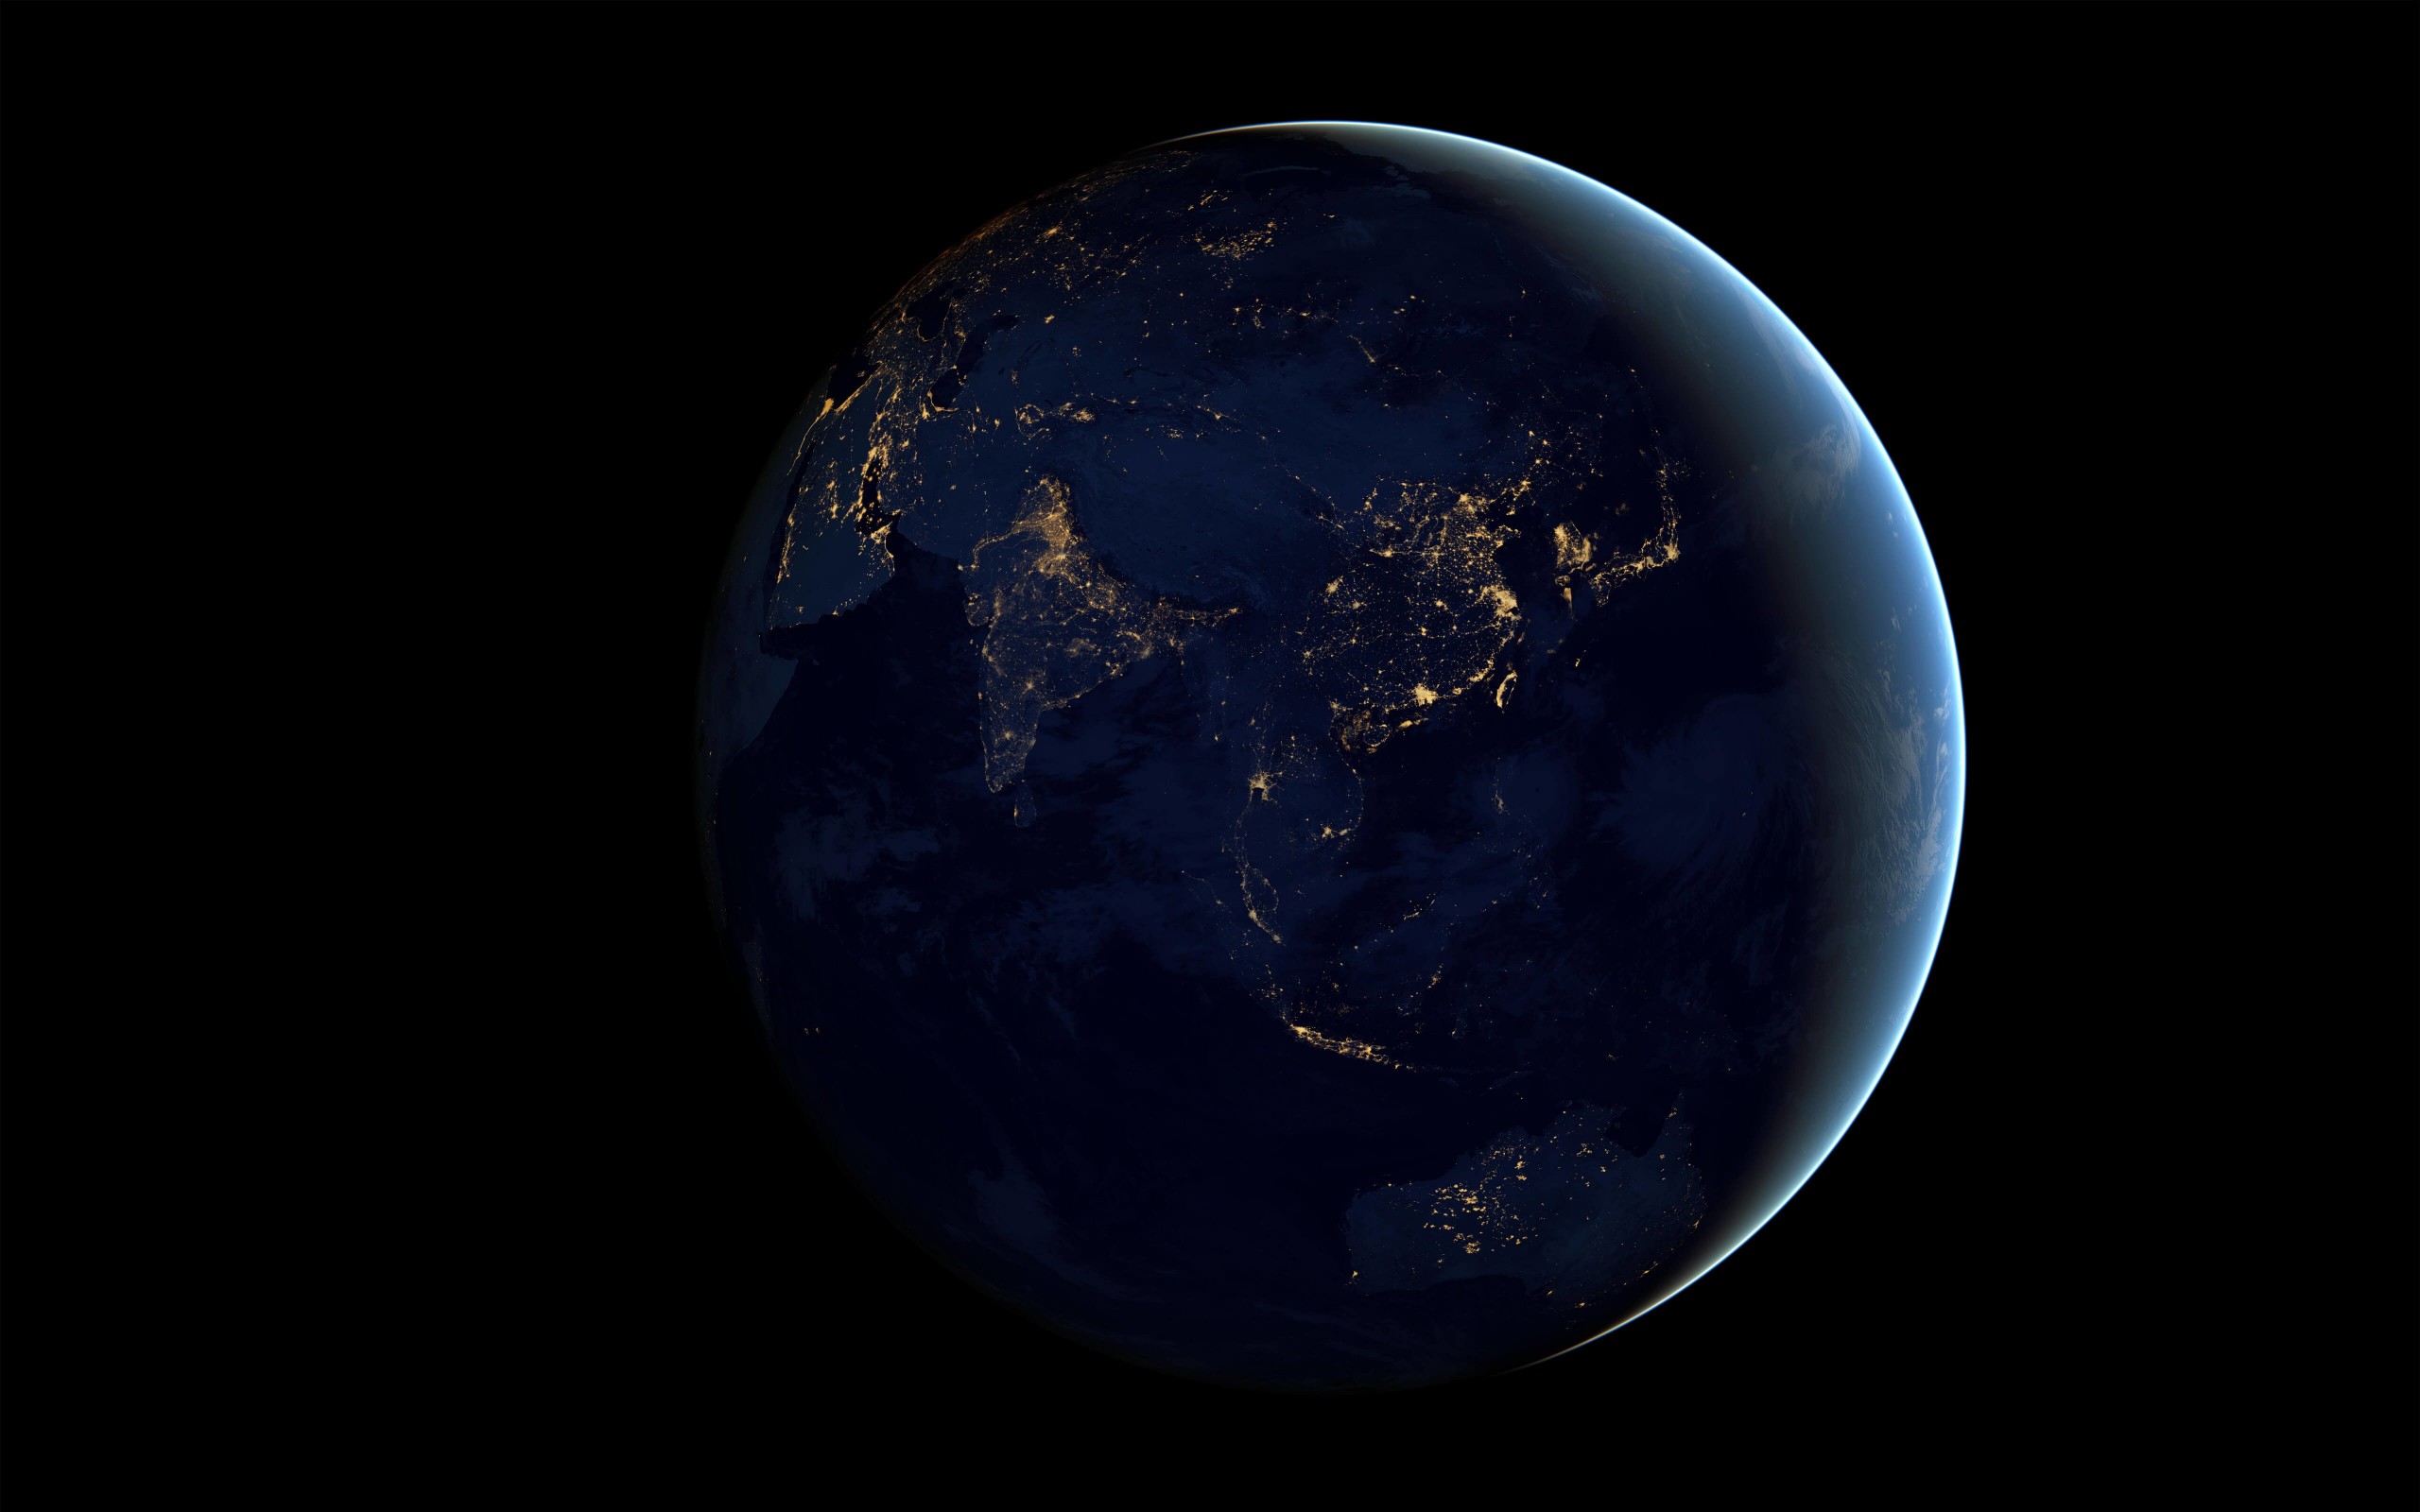 Earth At Night Seen From Space Wallpaper for Desktop 2560x1600